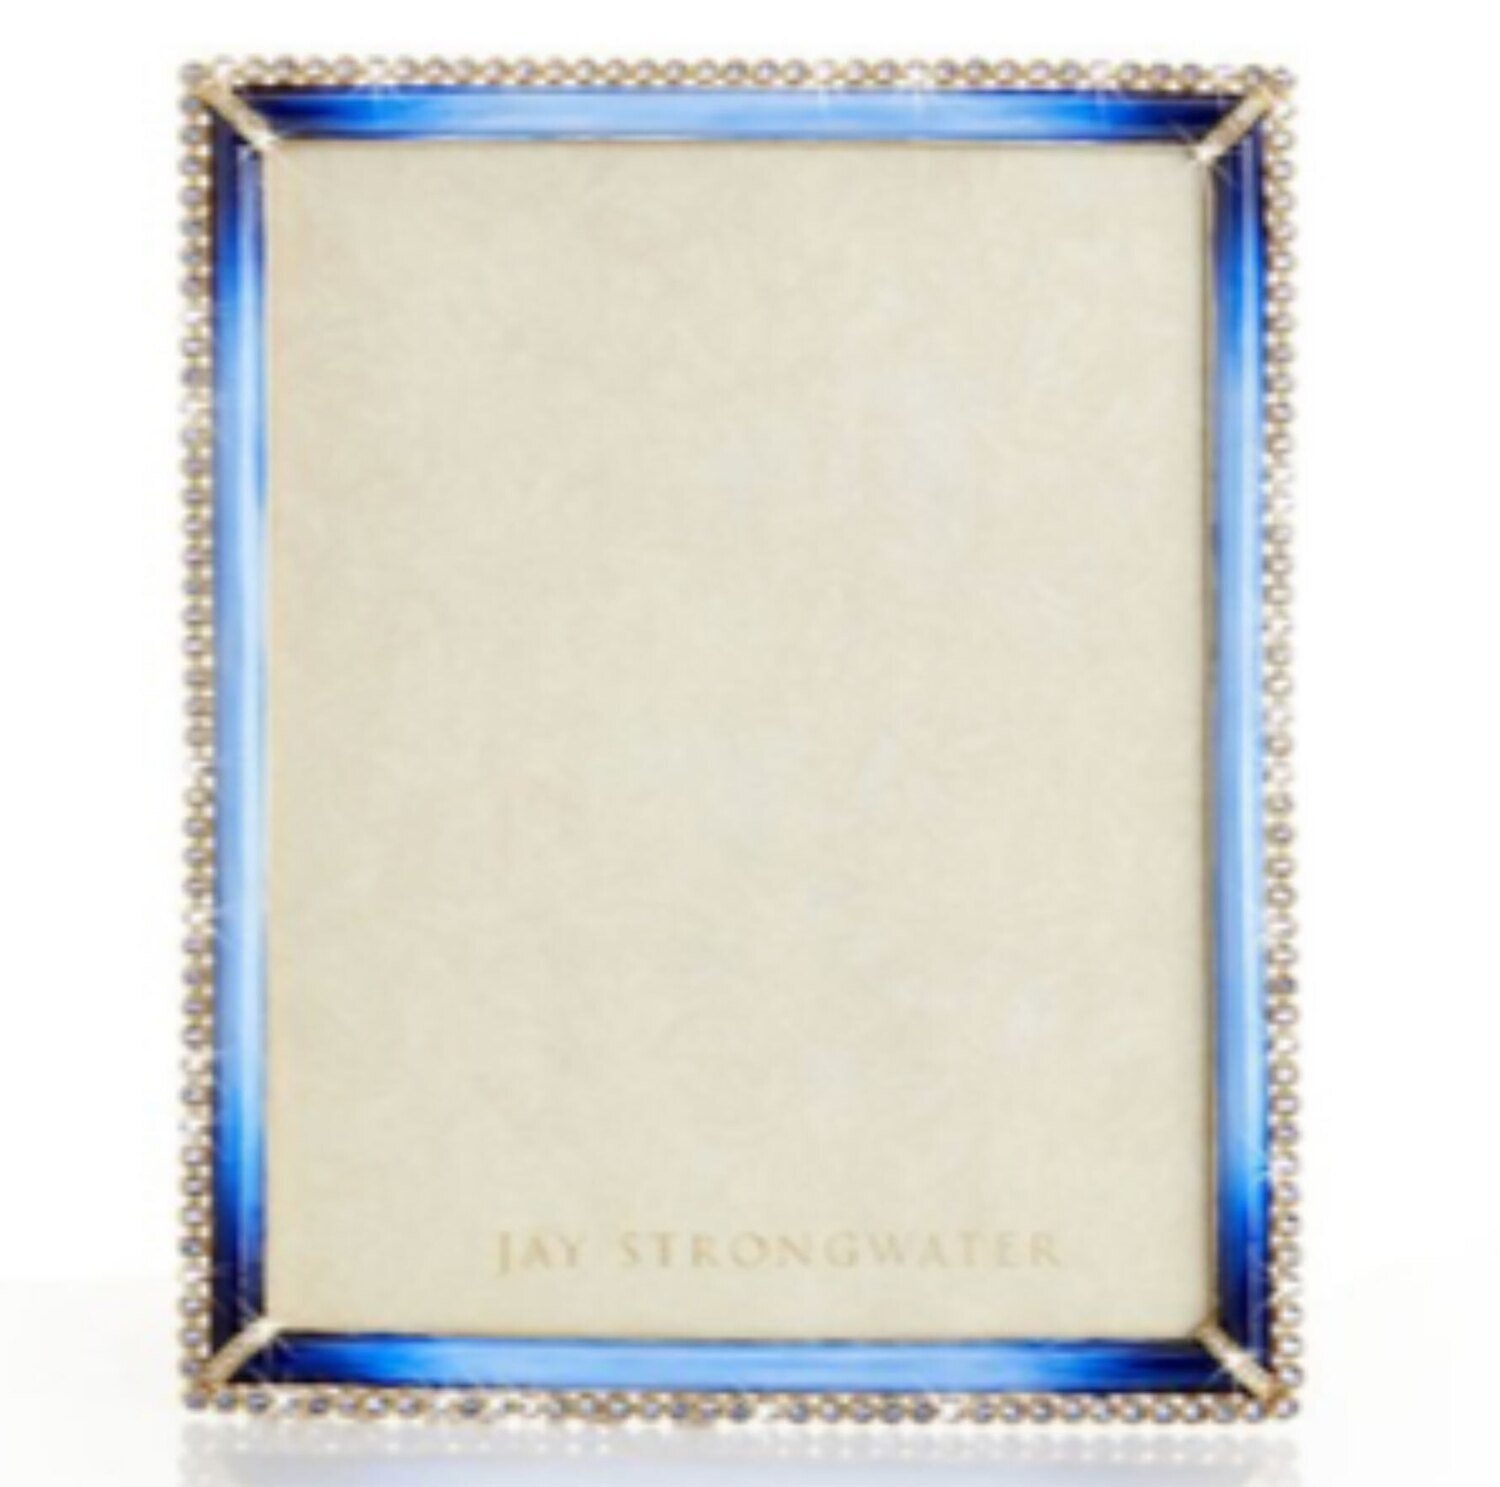 Jay Strongwater Laetitia Stone Edge 8" x 10" Picture Frame SPF5512-261